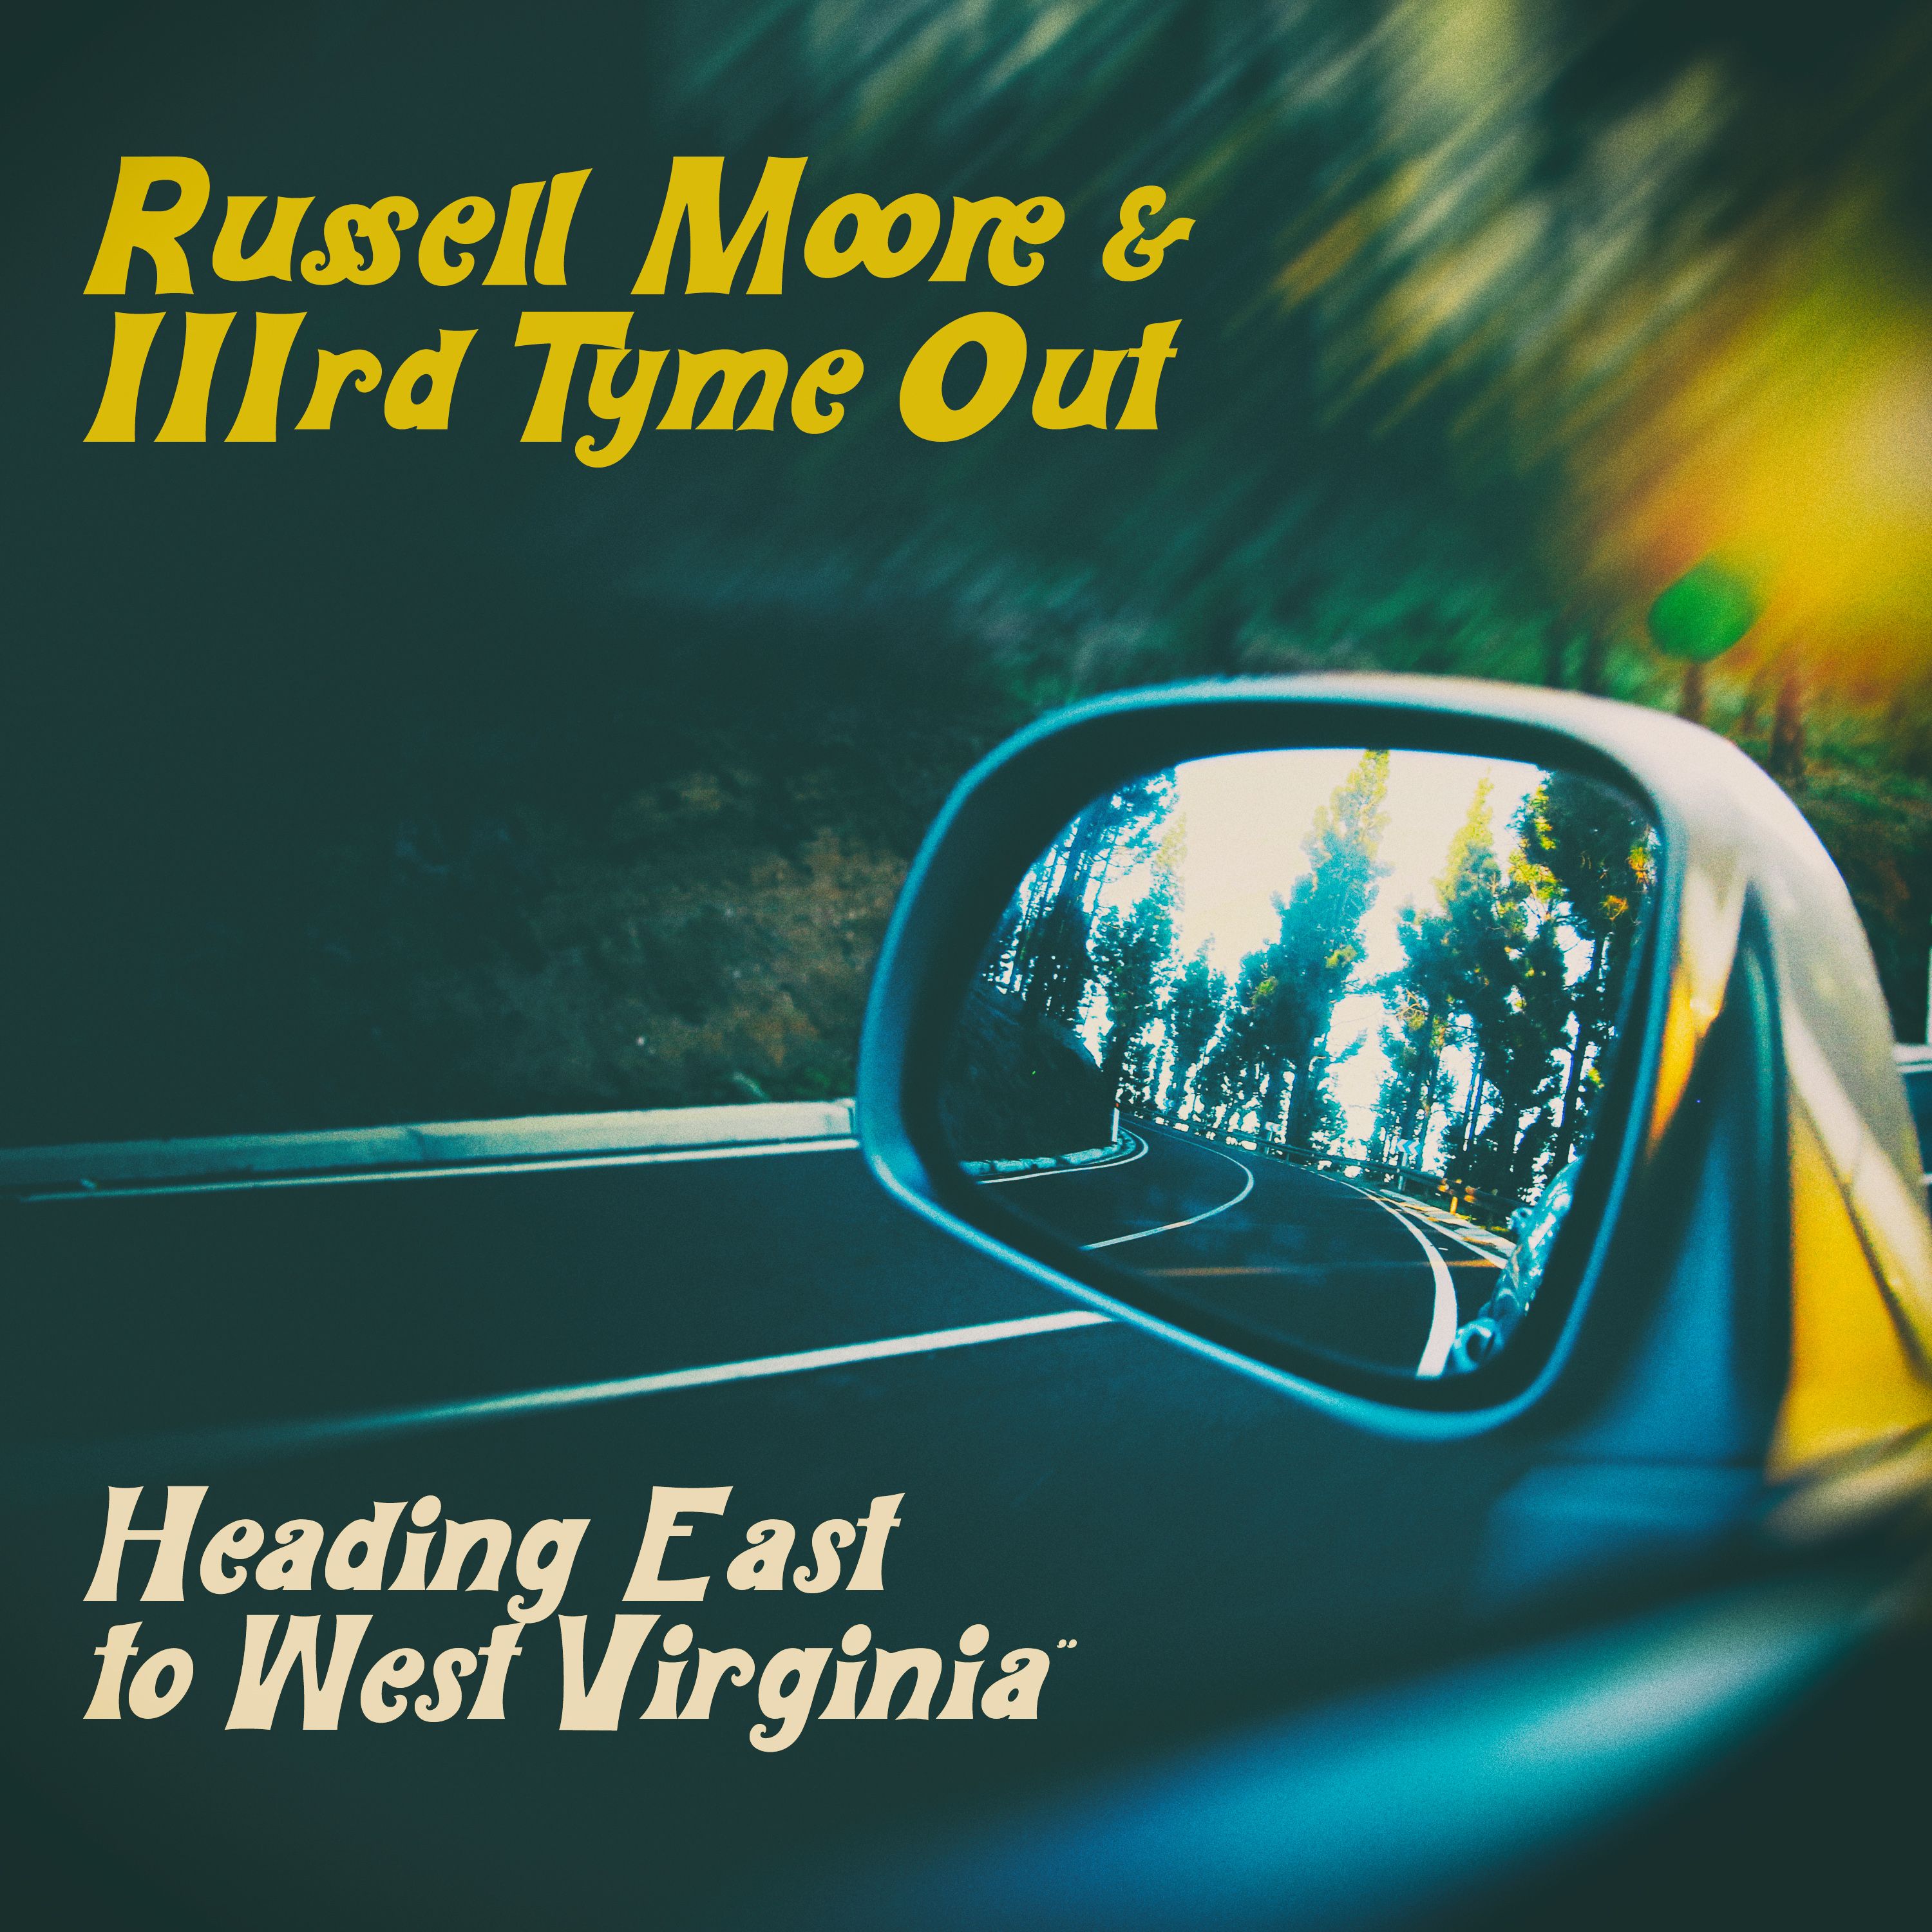 Russell Moore & IIIrd Tyme Out Release Two New Singles This Week